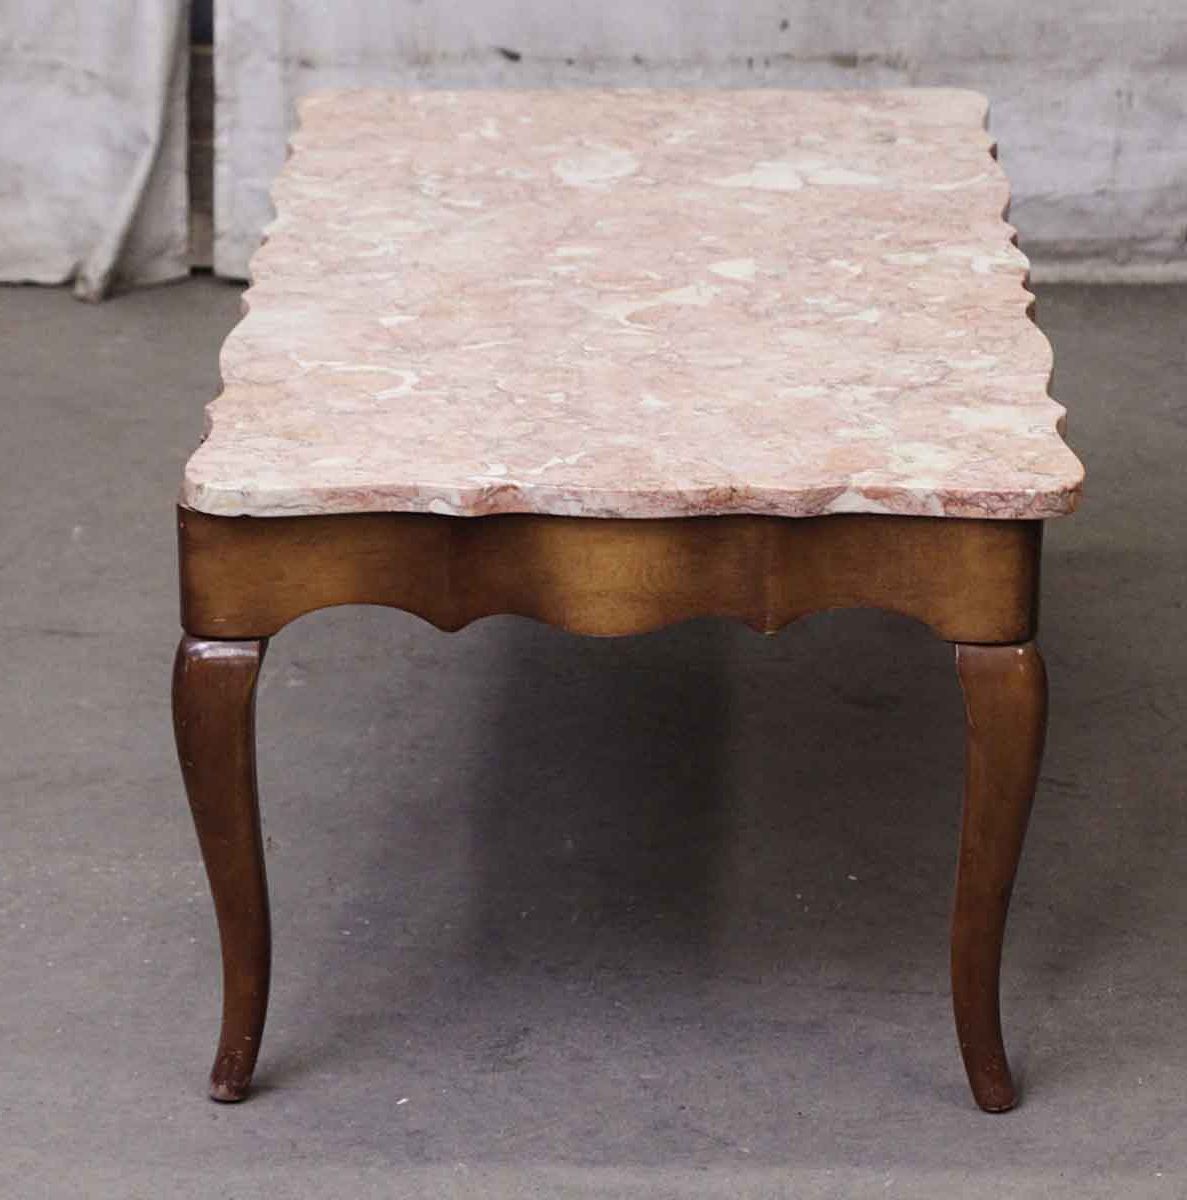 Favorite Marble Top Coffee Tables Throughout French Provincial Coffee Table With Rose Marble Top (View 8 of 20)